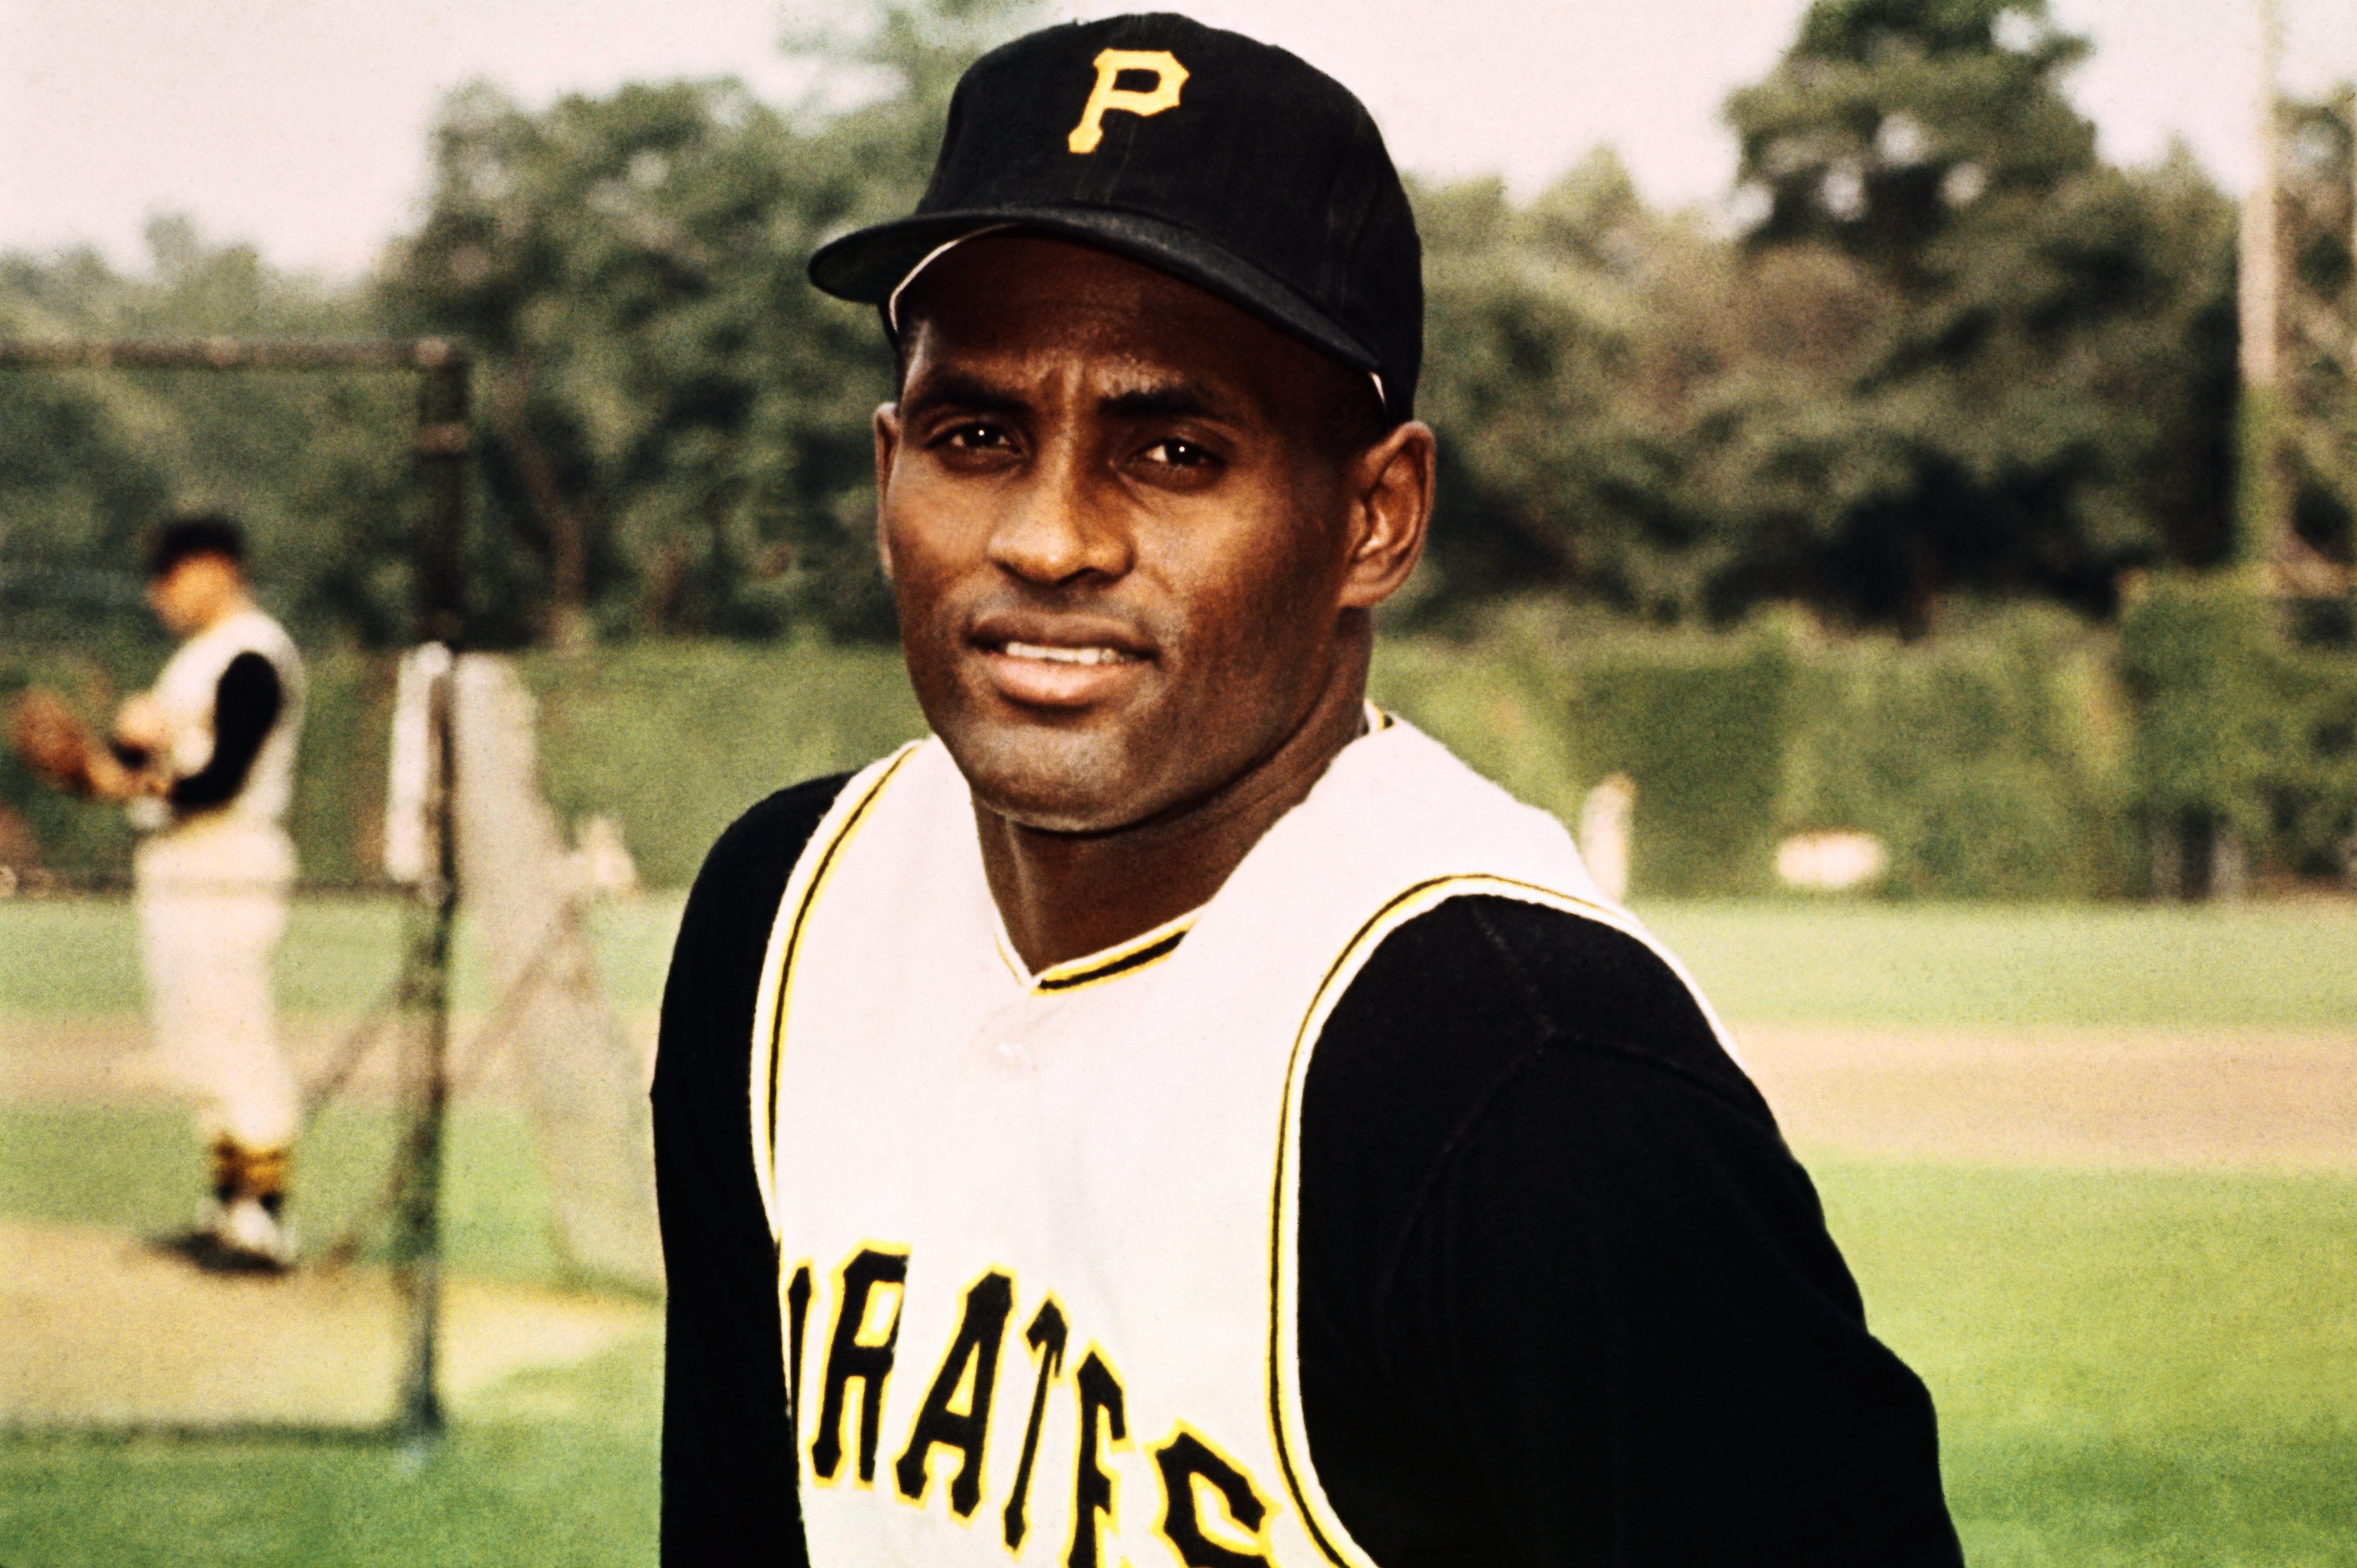 To Honor Roberto Clemente, MLB Expands List of Who Can Wear No. 21